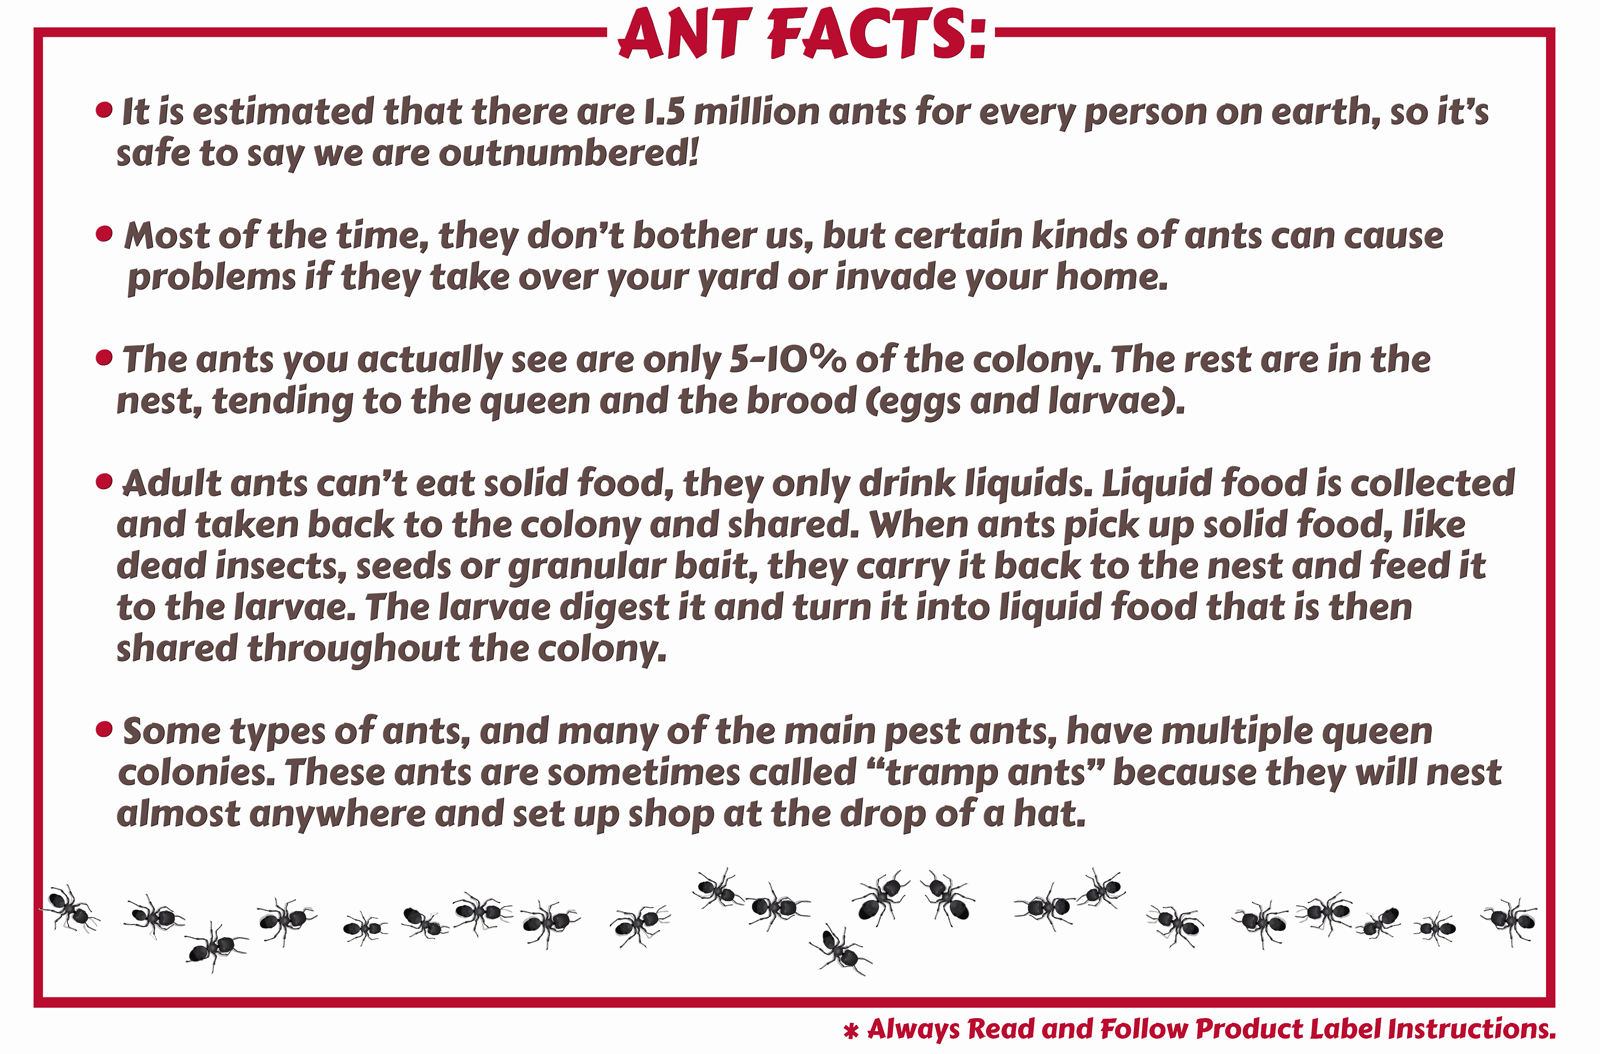 Maggie's Farm Ant Facts